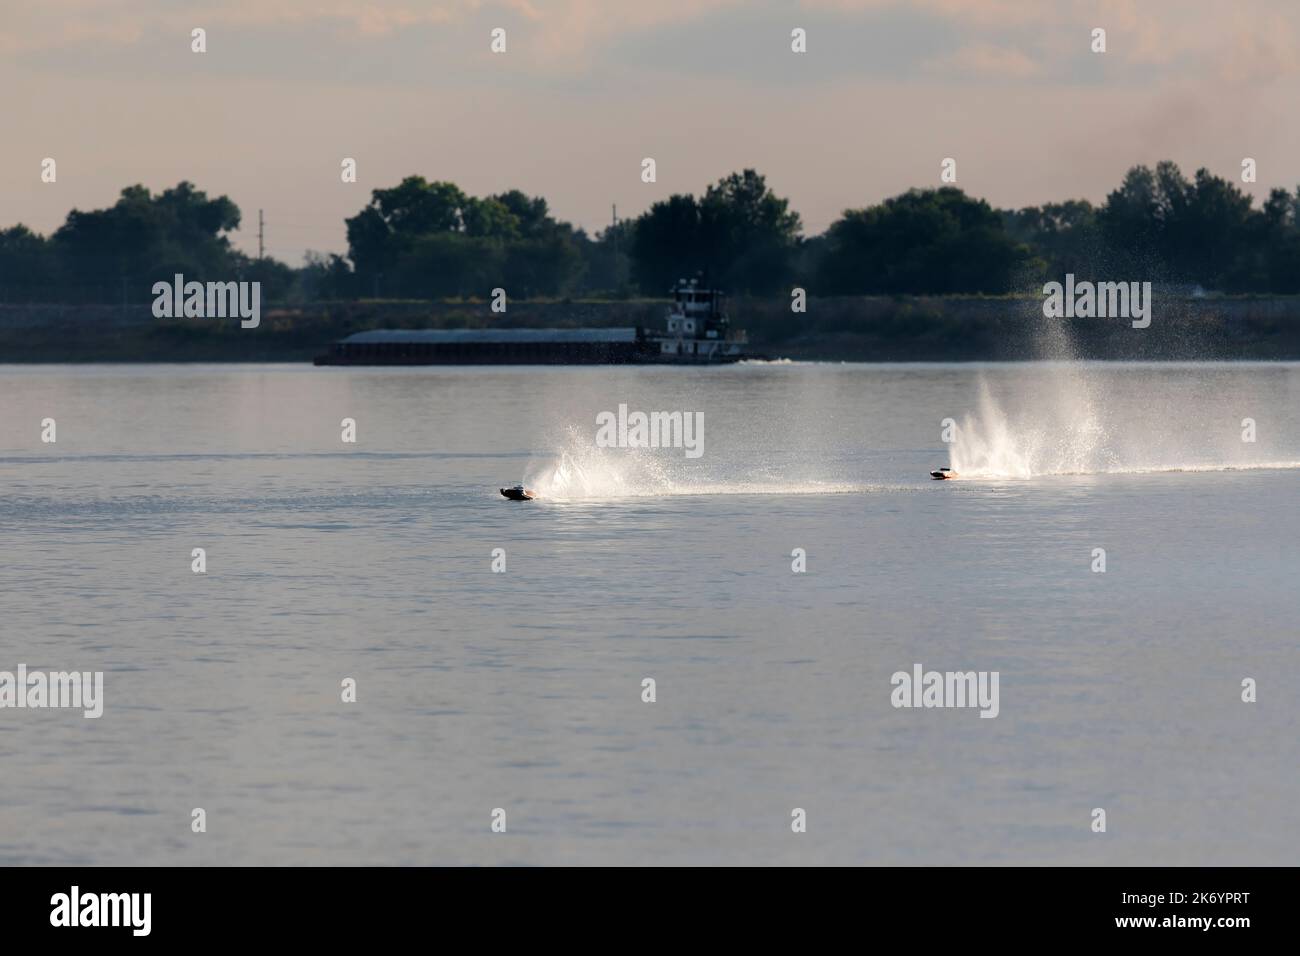 Racing high speed remote controlled boats on the Mississippi River near Muscatine, Iowa.  In the background a tow pushes a loaded barge down the river Stock Photo